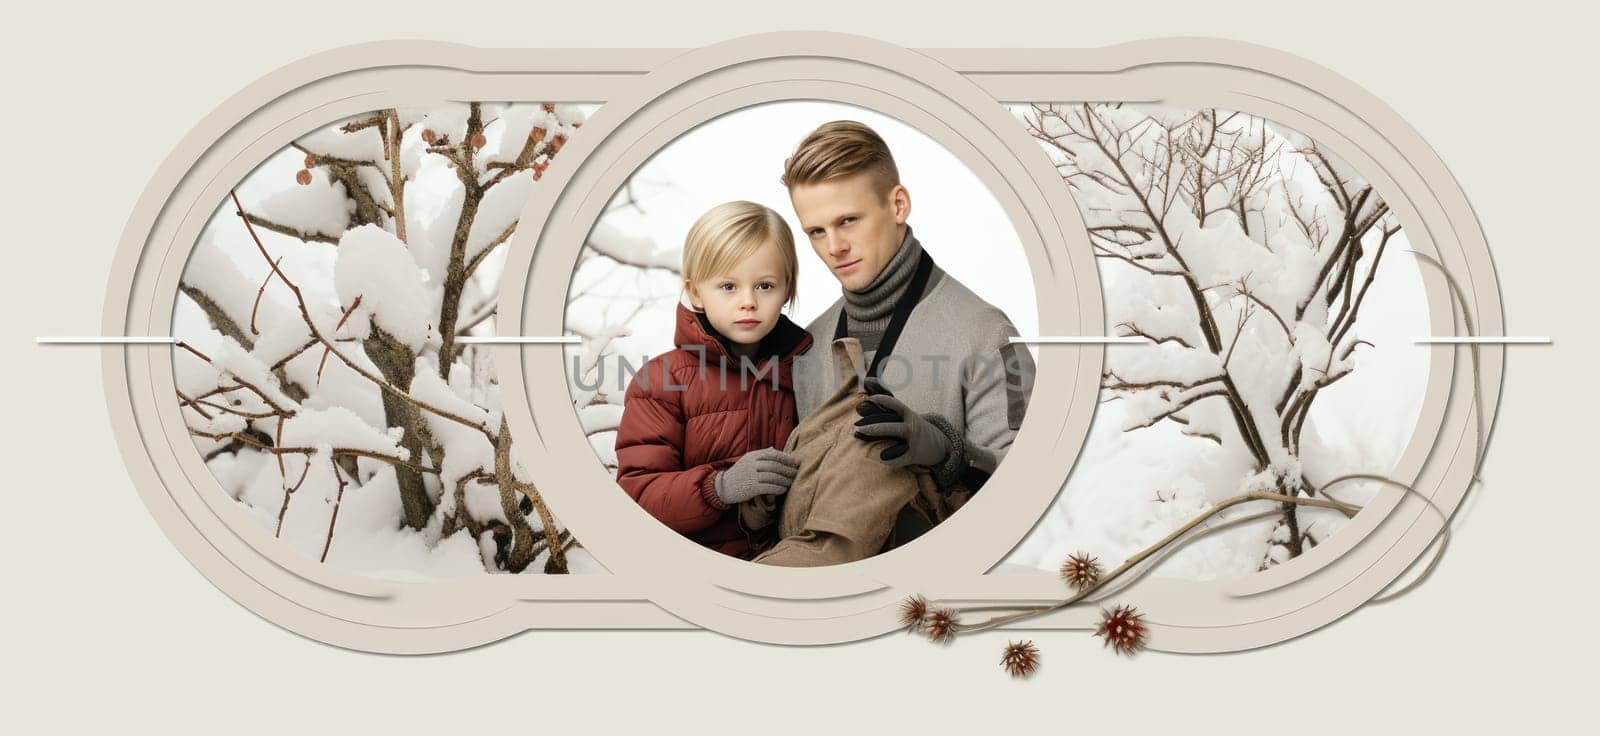 A unique card with oval circles and a white background, creating the ability to insert photos of your family